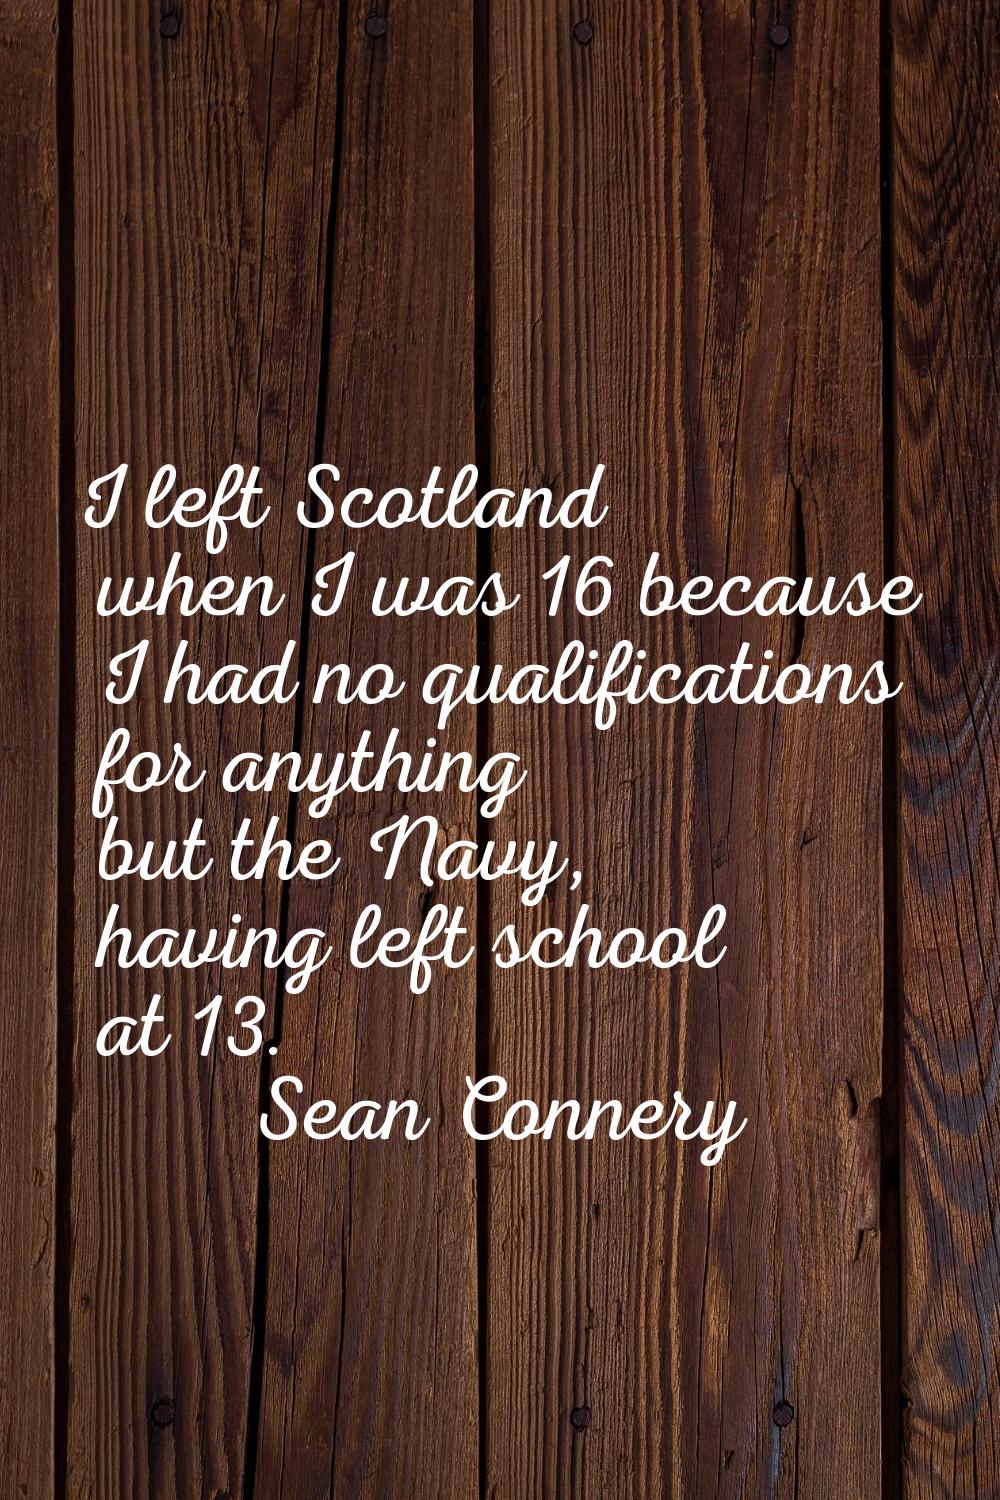 I left Scotland when I was 16 because I had no qualifications for anything but the Navy, having lef